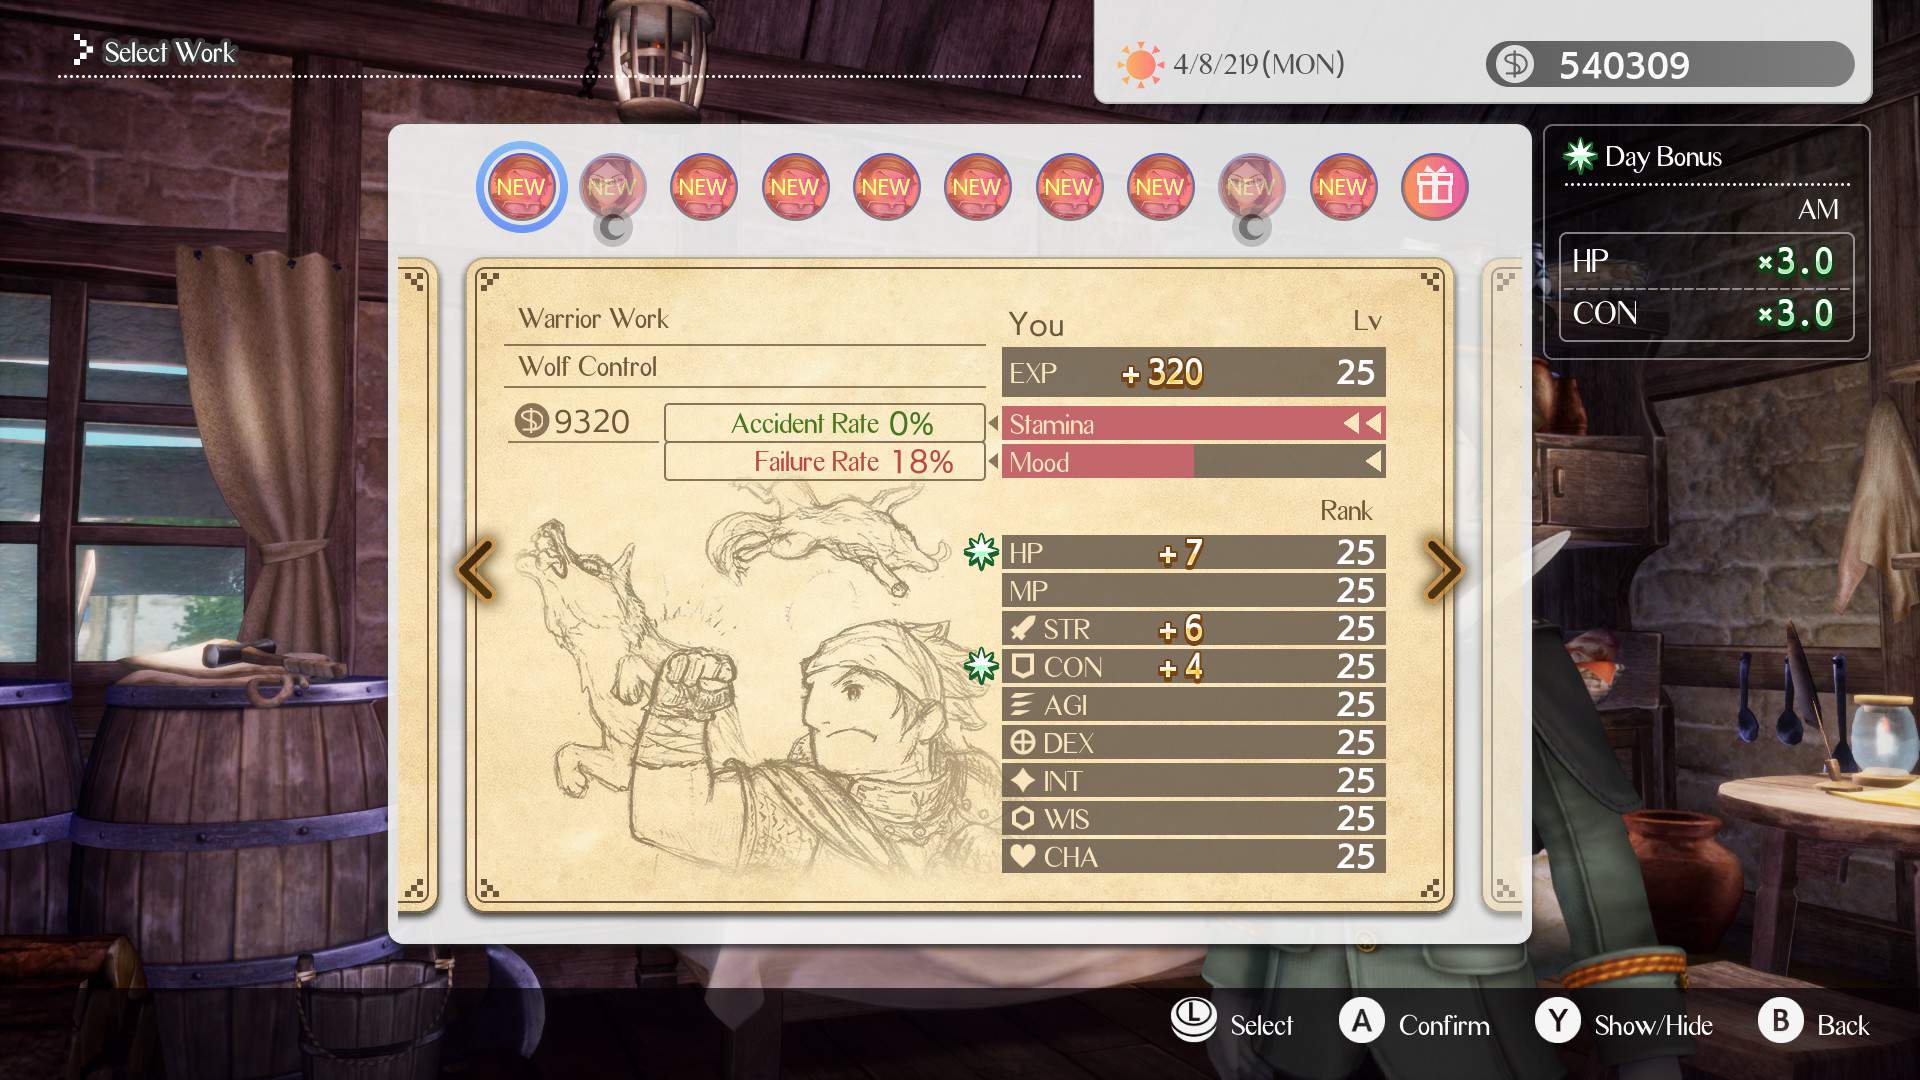 Gameplay screenshot showing a work selection screen with various stats and information